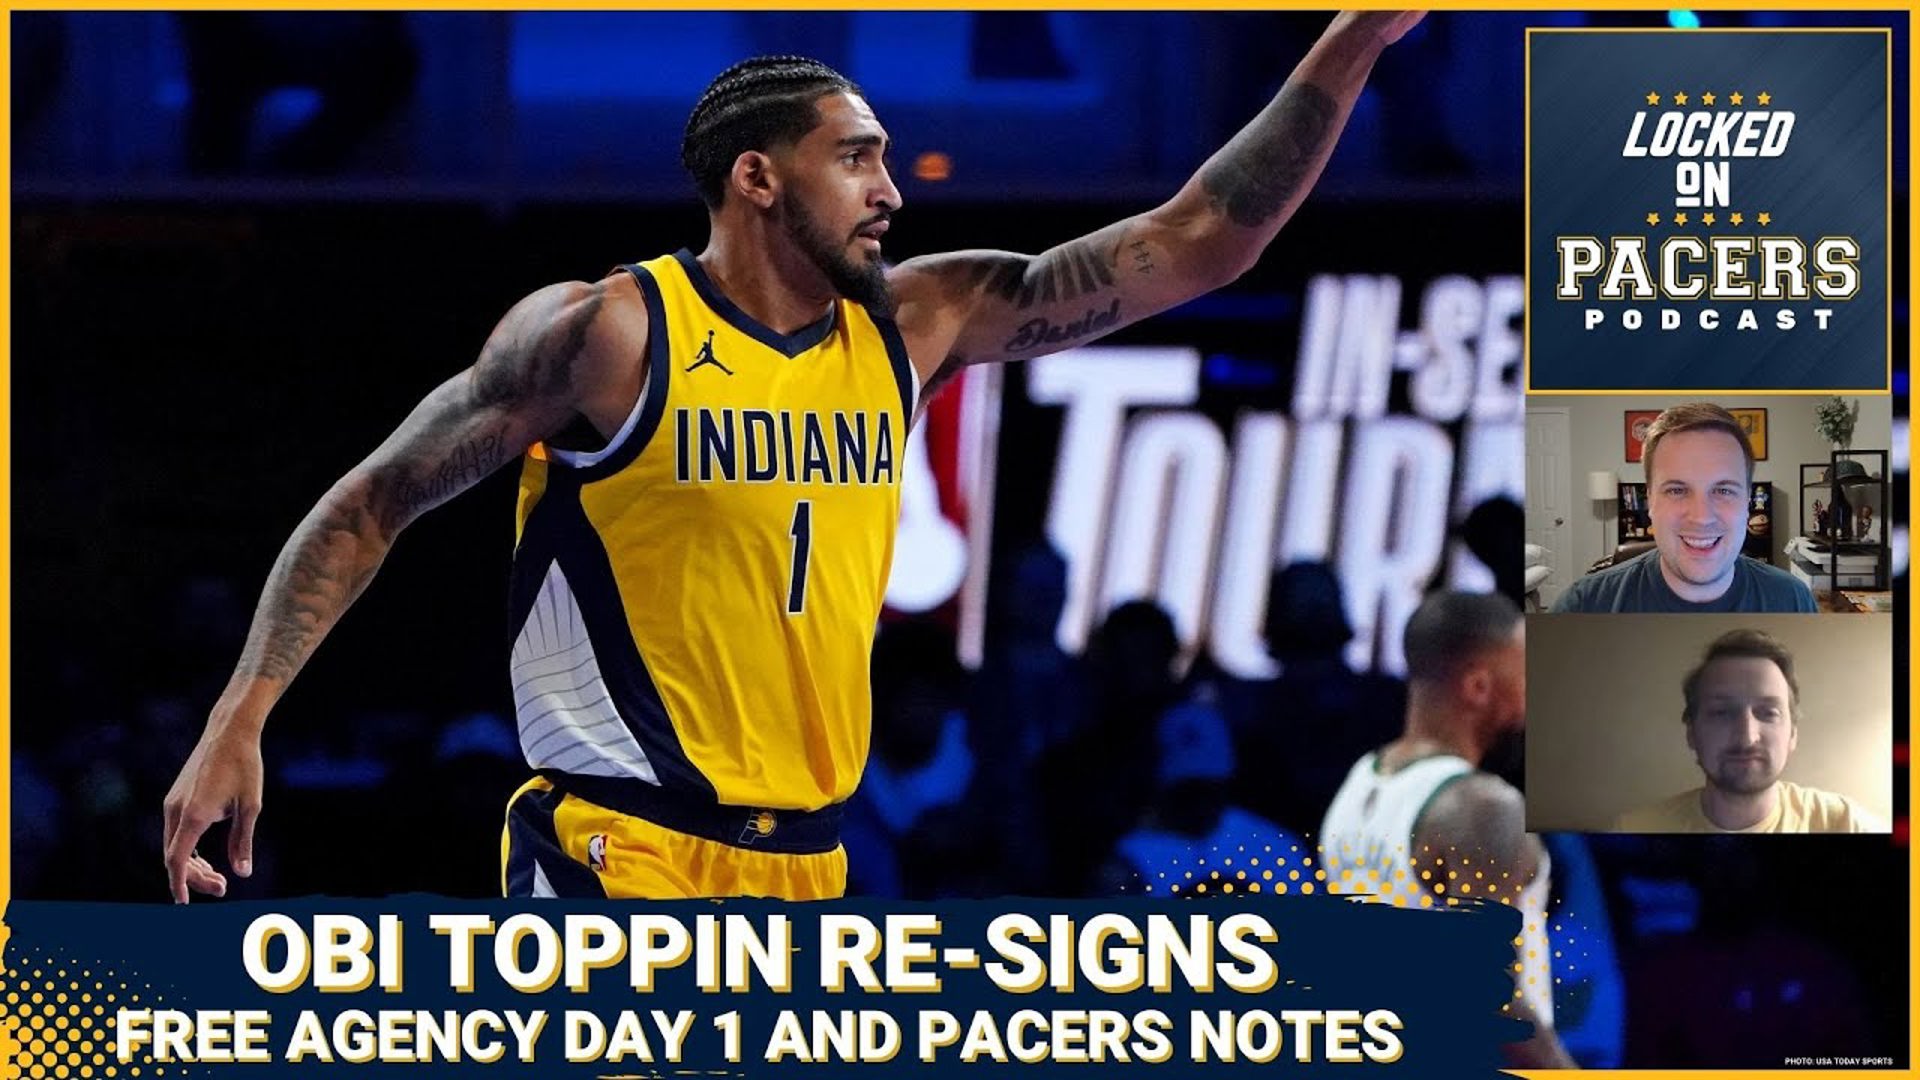 Indiana Pacers re-sign Obi Toppin — is it a good deal and what comes next? Free agency day 1 recap